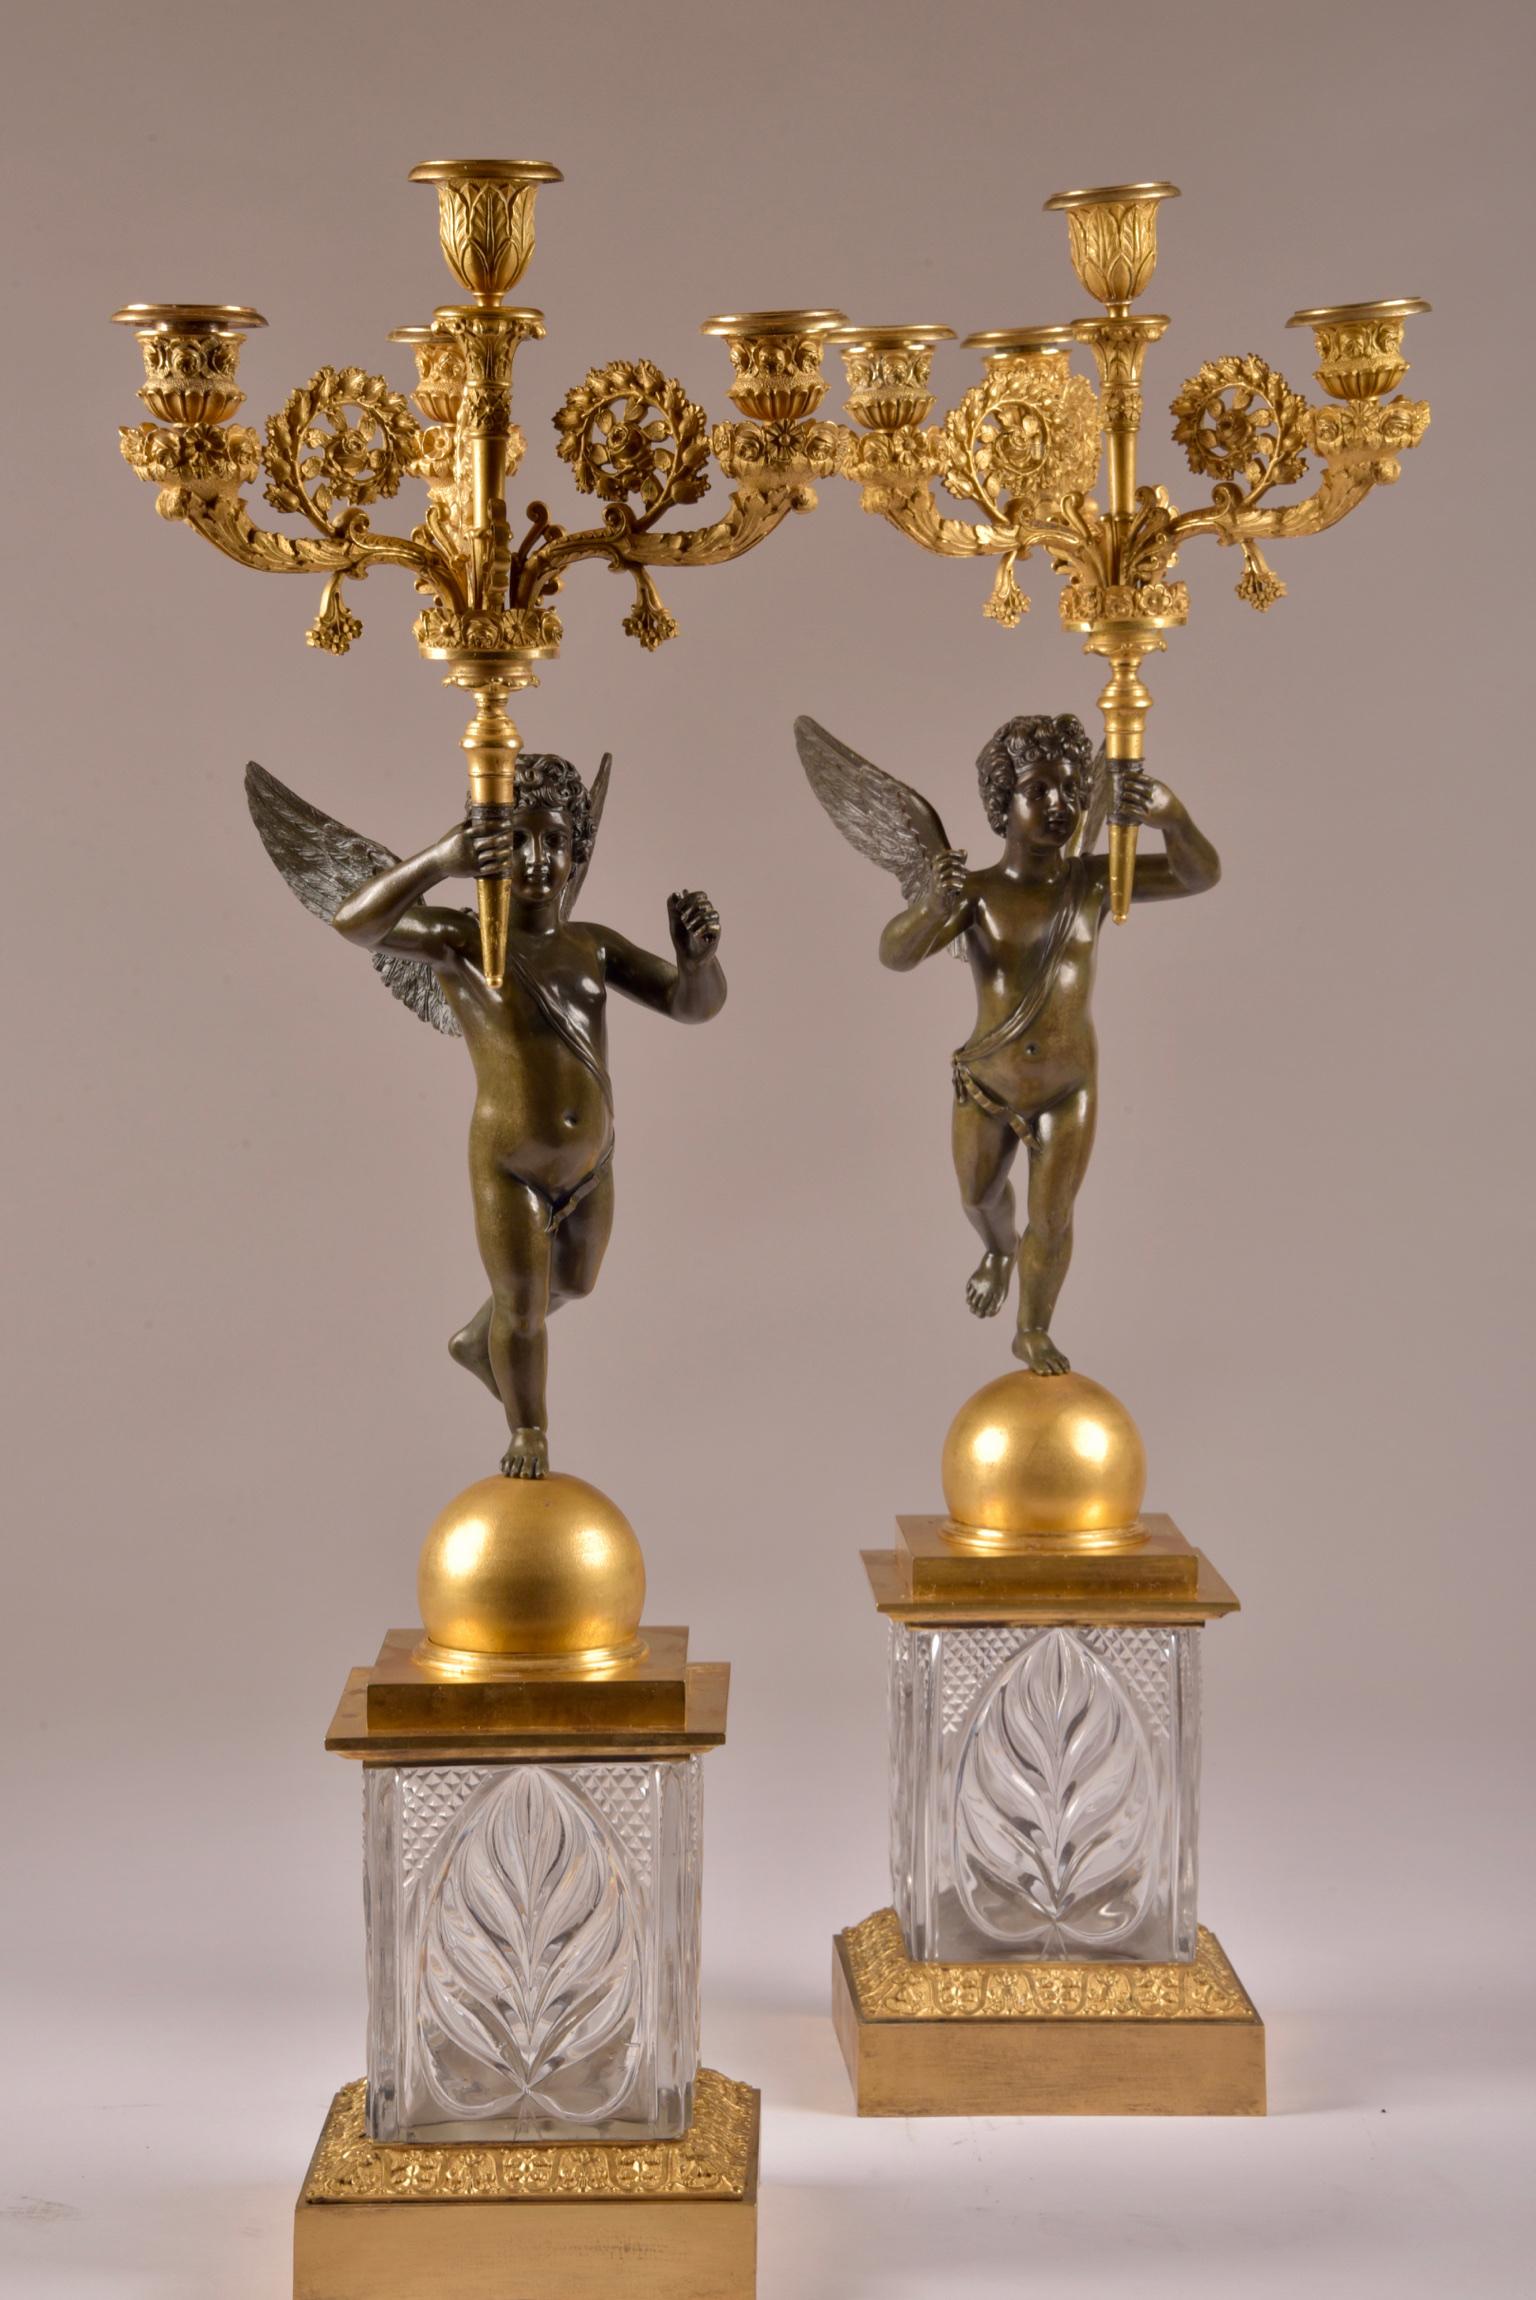 Pair of French Empire Candelabras with Putti, Superb Ormolu Candleholders, 1810  im Angebot 6